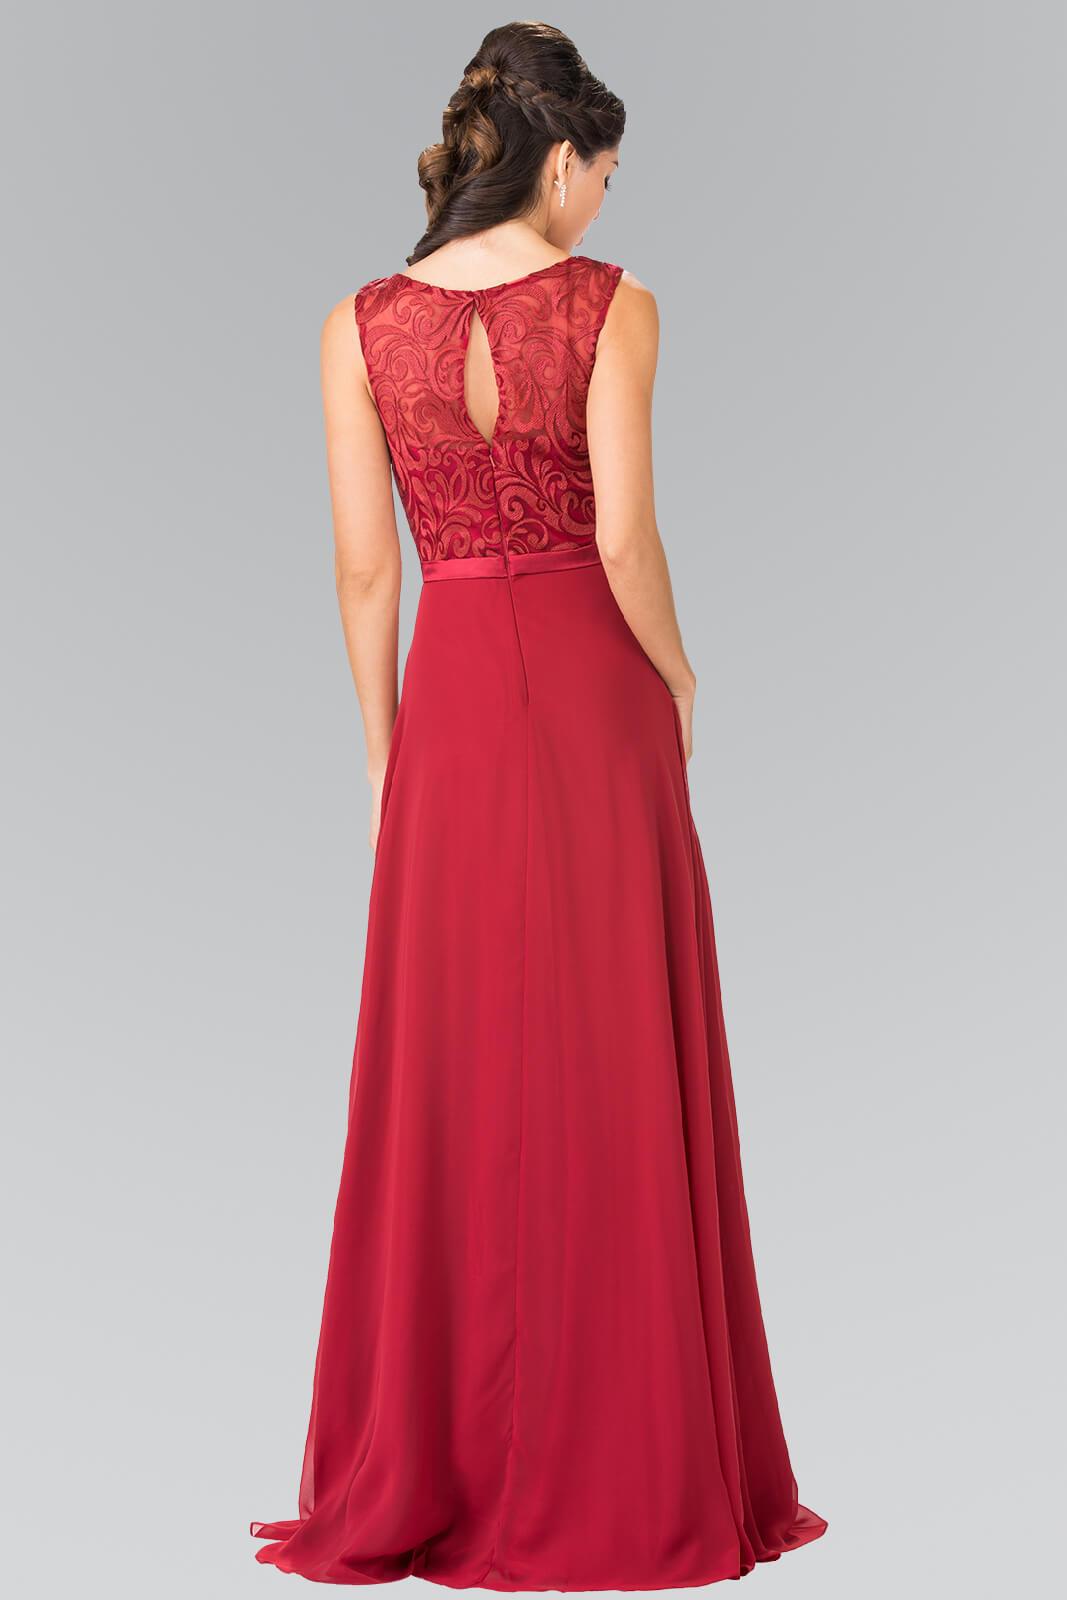 Embroidery Top Chiffon Long Prom Dress Formal - The Dress Outlet Elizabeth K